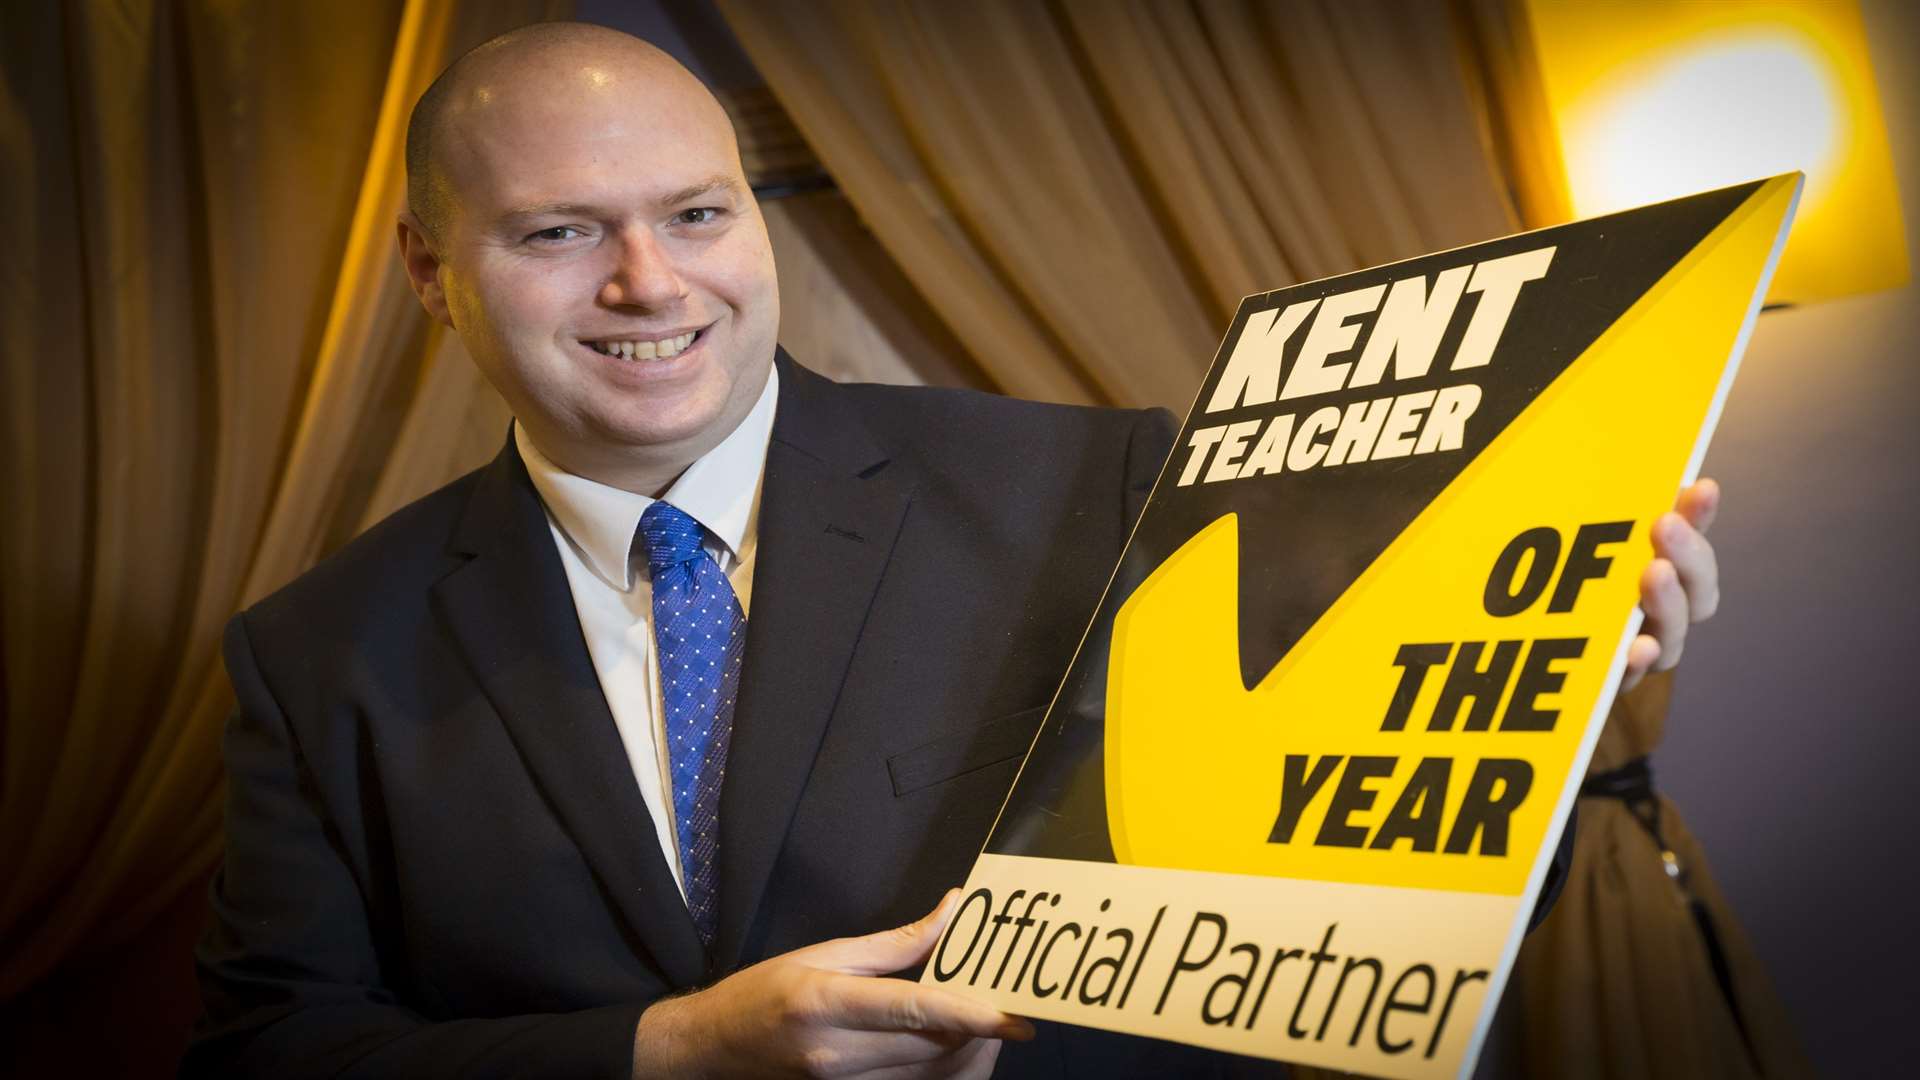 Rob Sellers from Kreston Reeves which is backing the Kent Teacher of the Year Awards 2018.